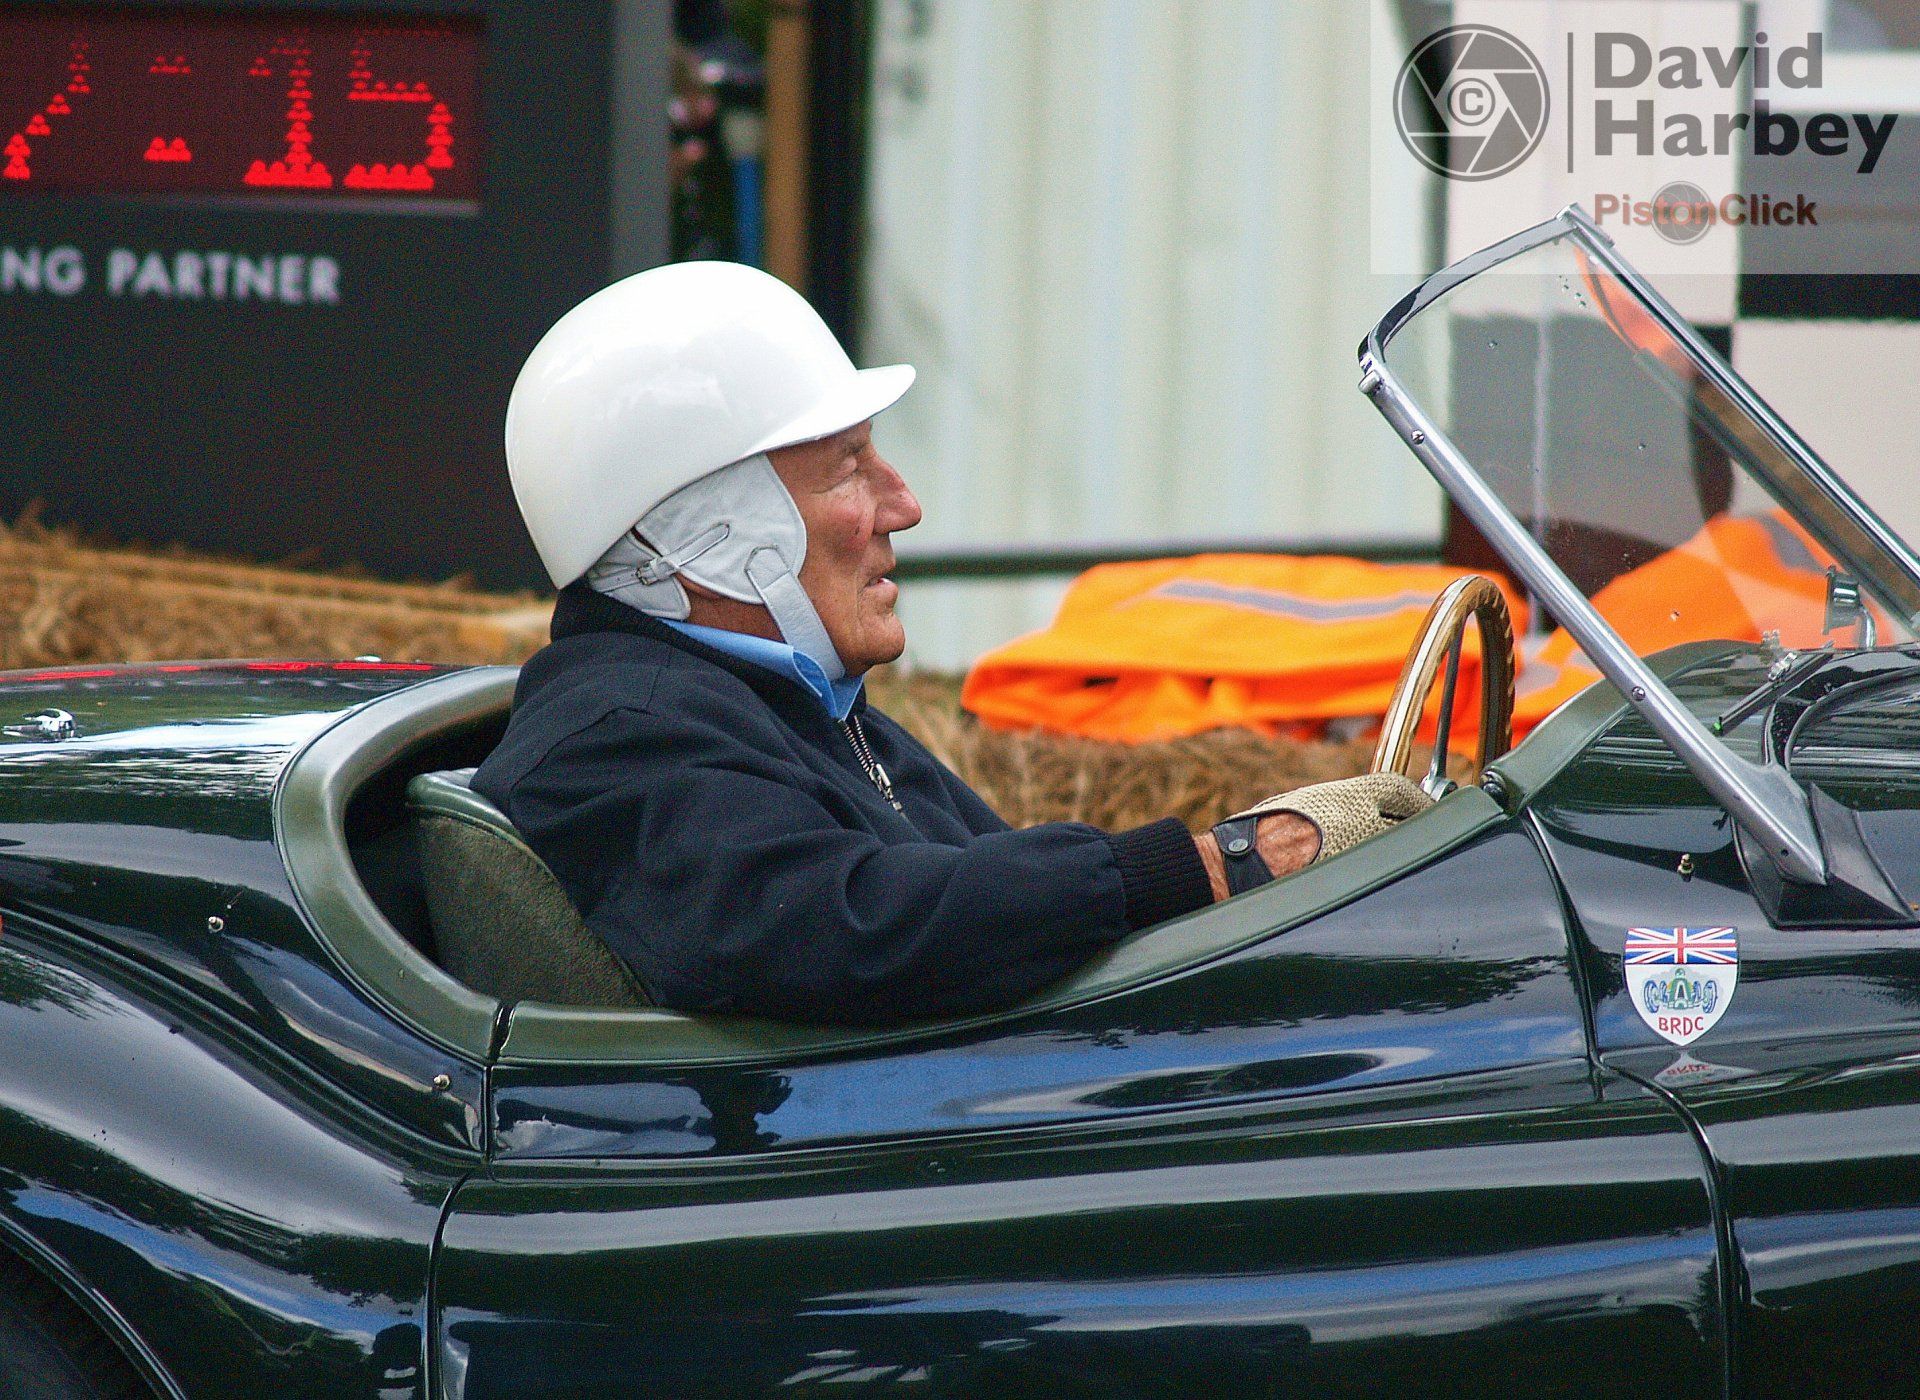 Stirling Moss Goodwood Festival of Speed 2012